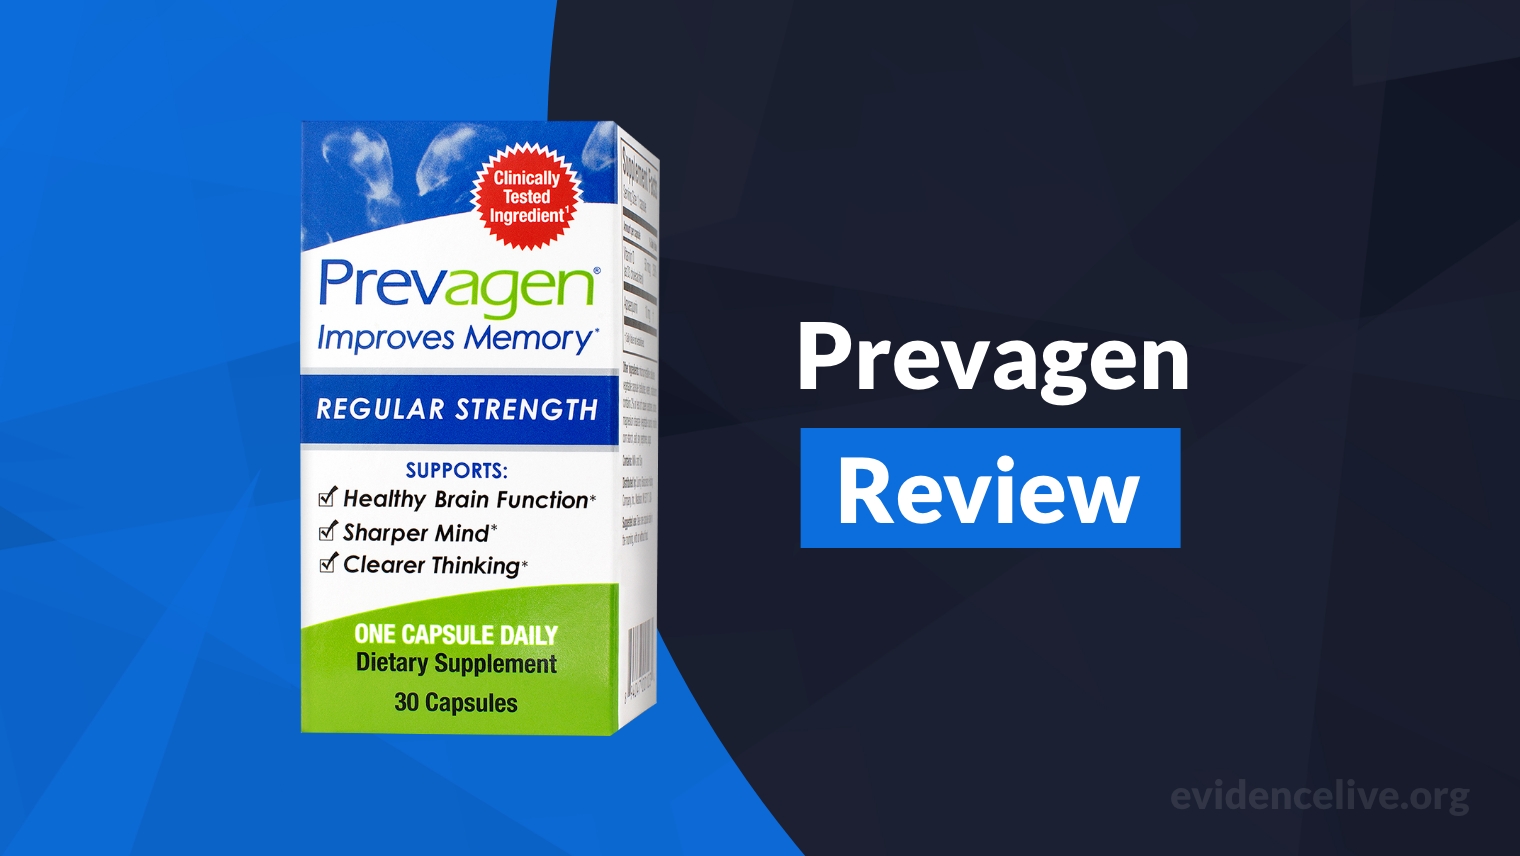 Prevagen Review: Does It Really Work For Memory?